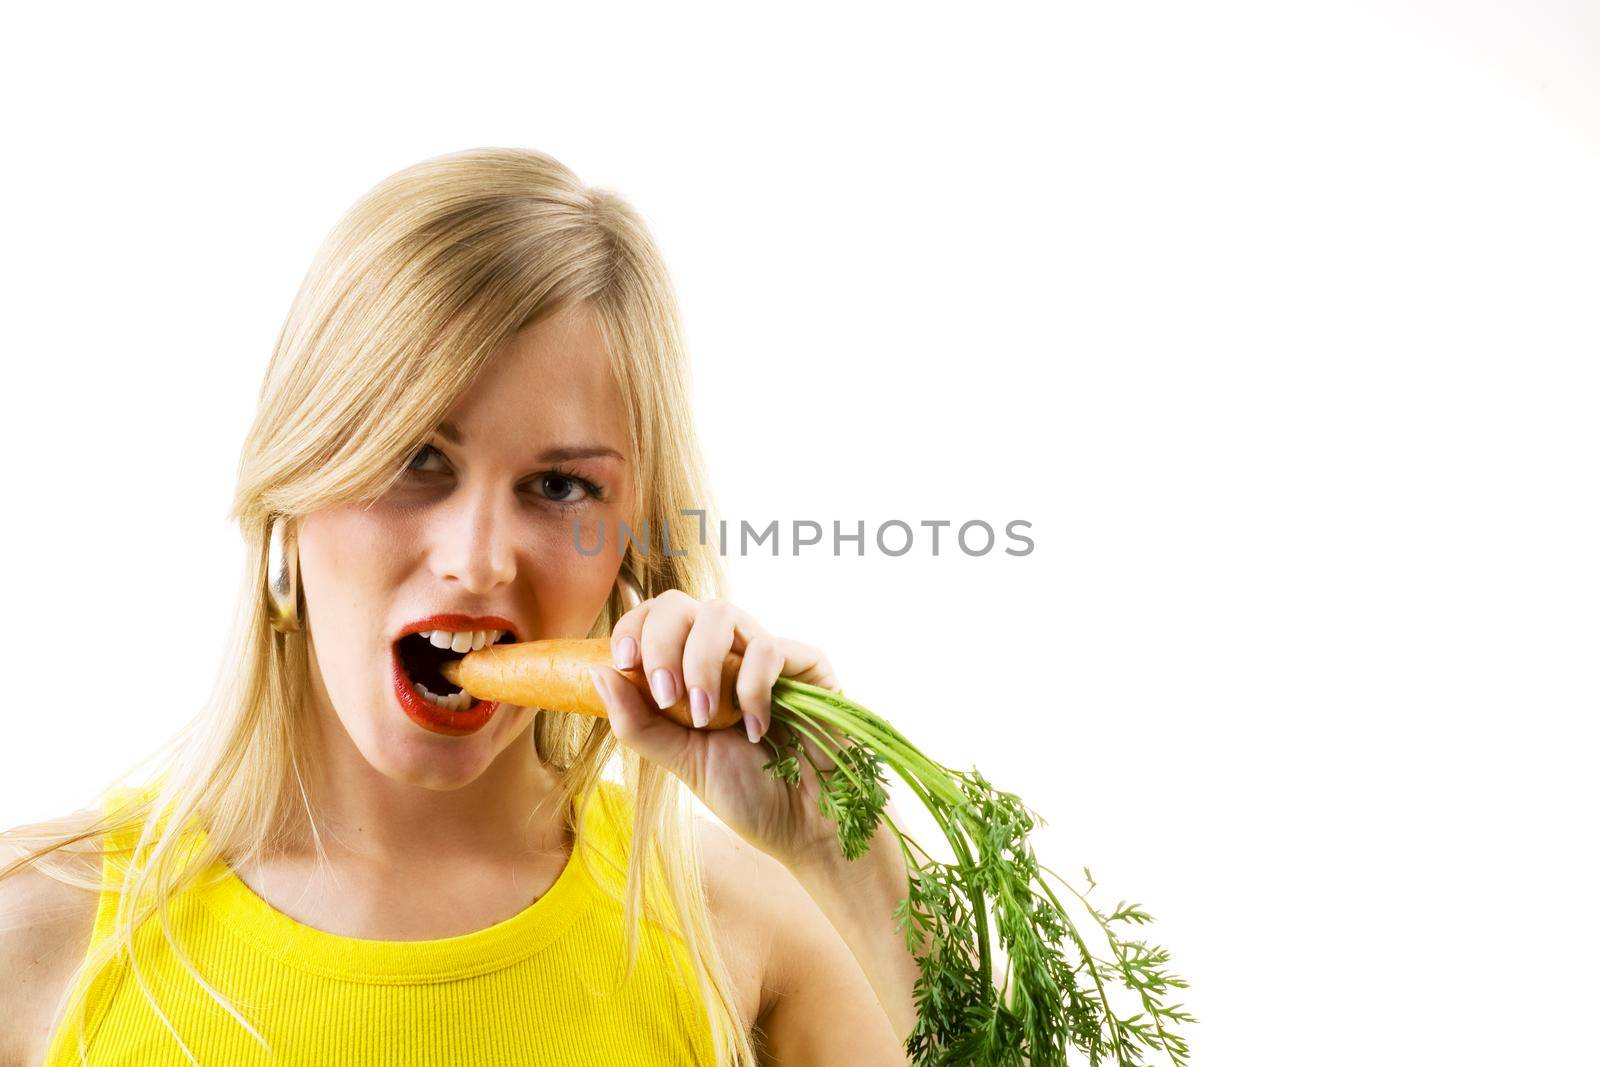 Food and healthy nutrition - Woman in yellow eating healthy vegetables